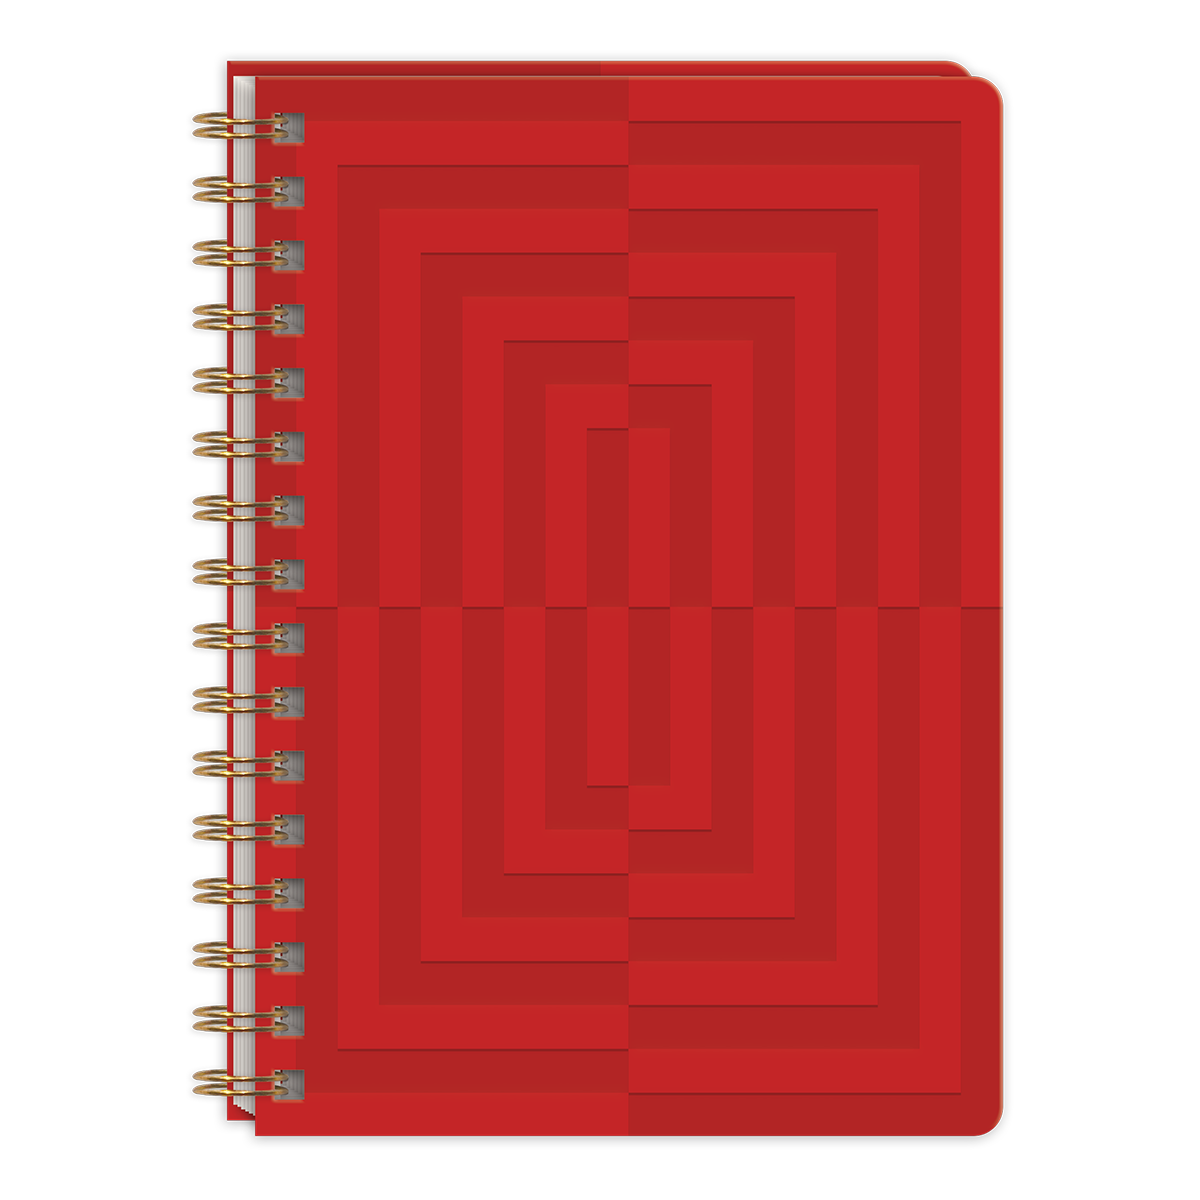 Statement Shapes Red Spiral Journal Product